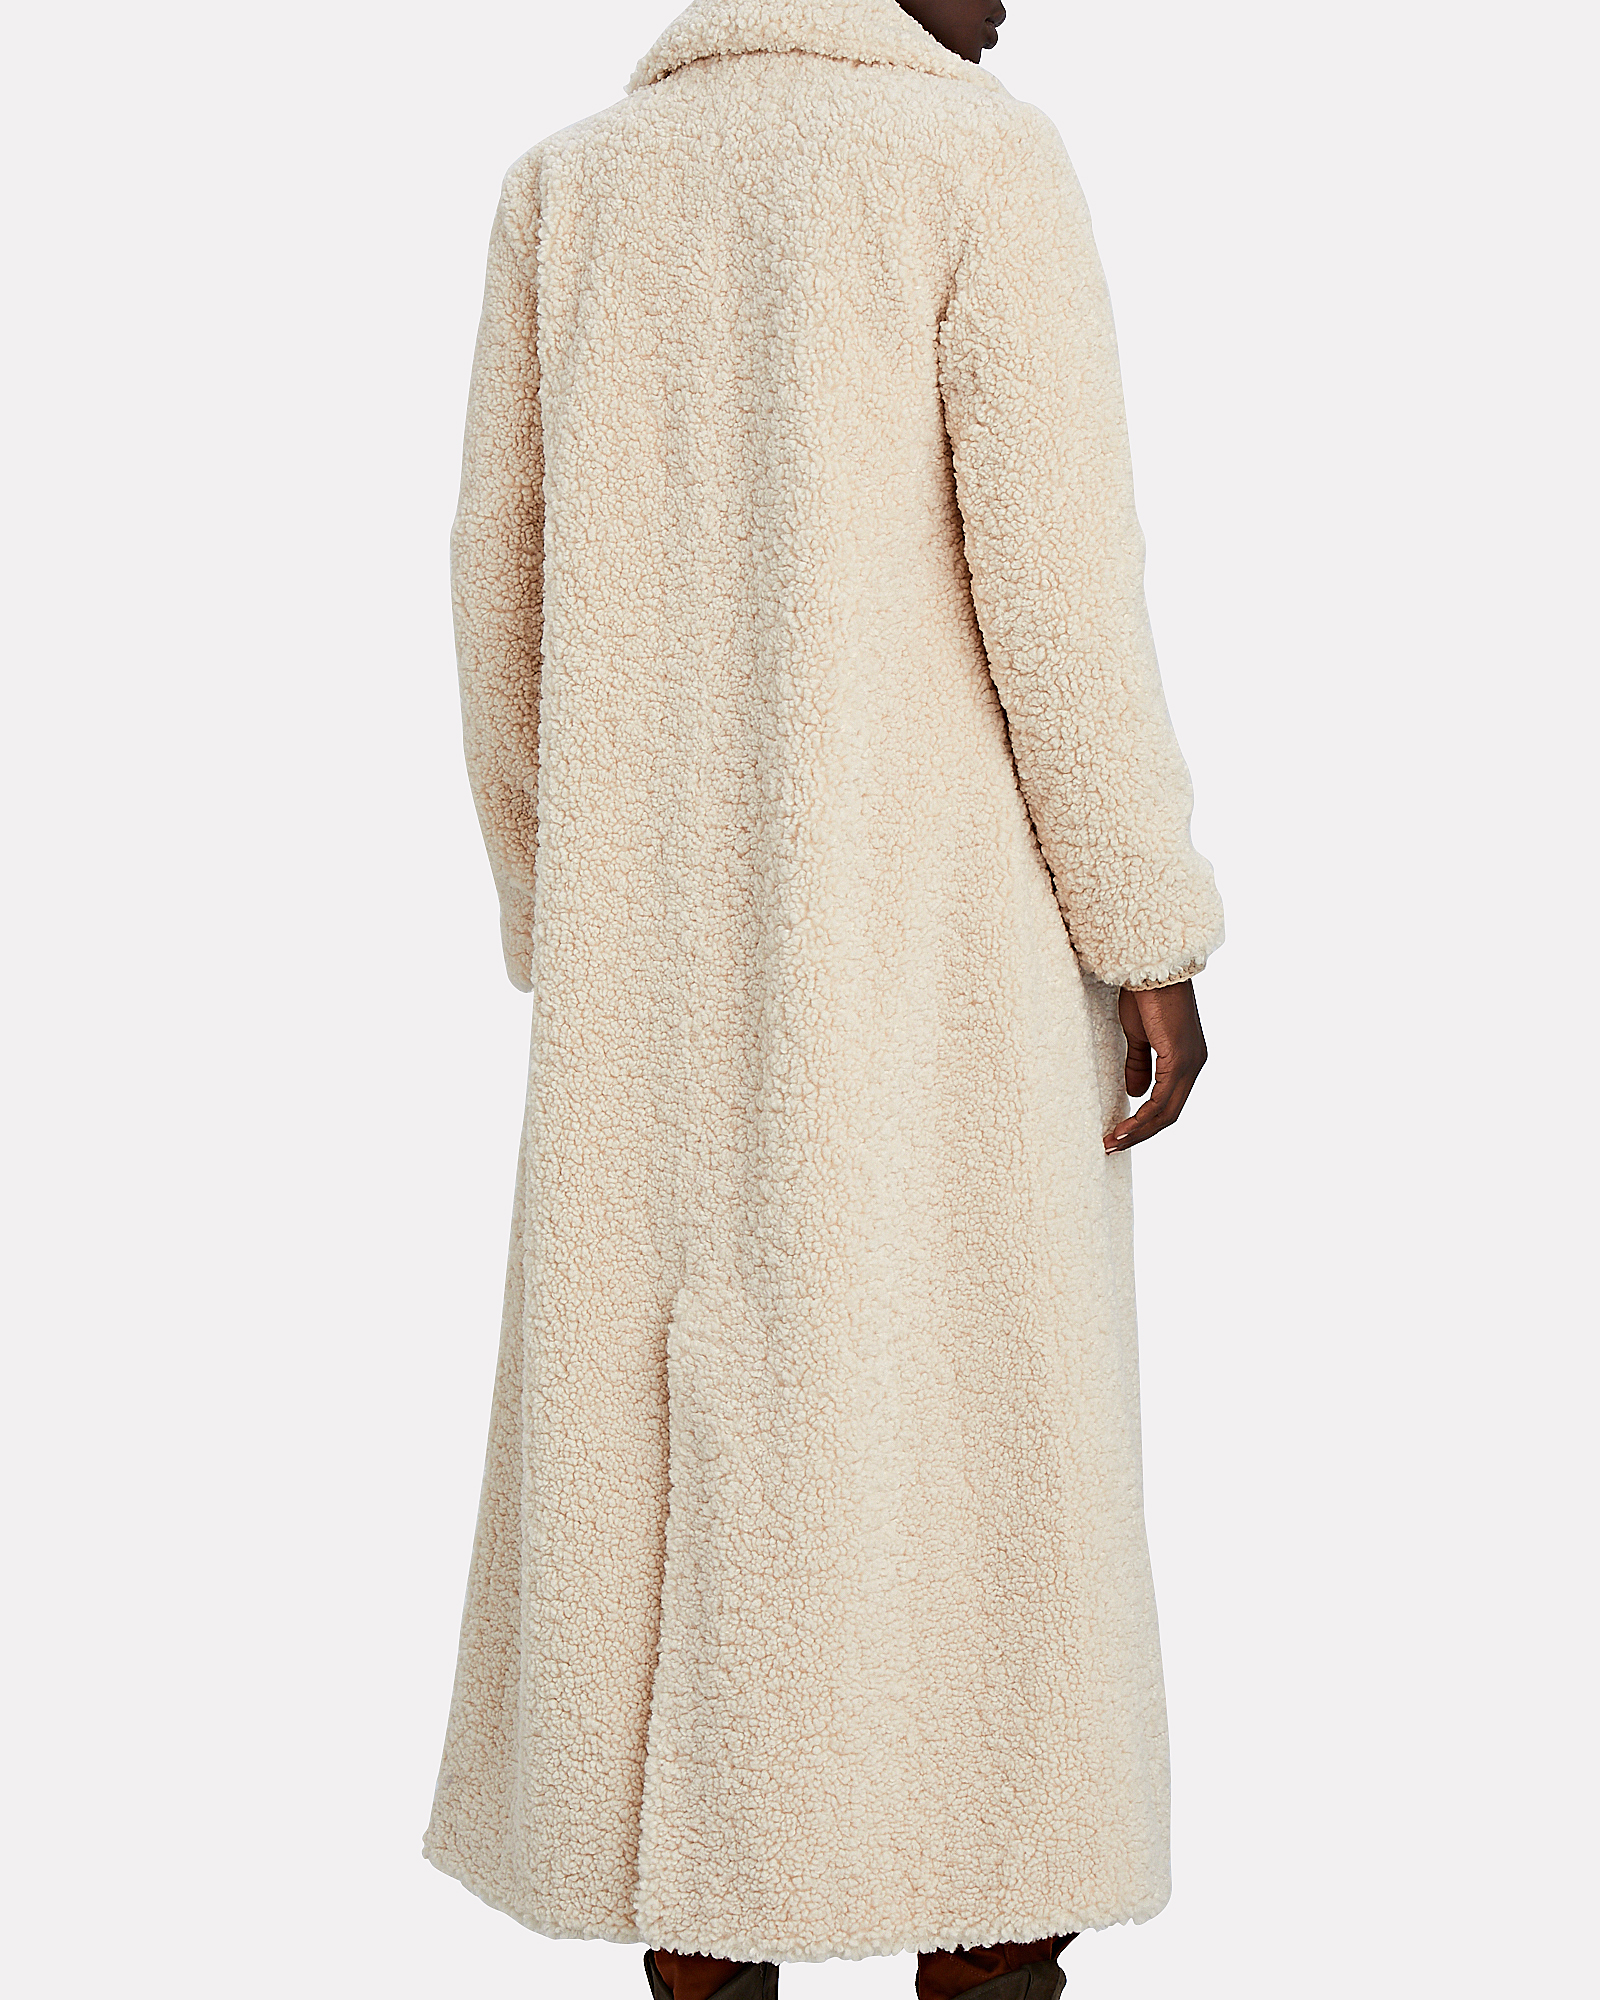 STAND Kylie Long Teddy Coat | INTERMIX®